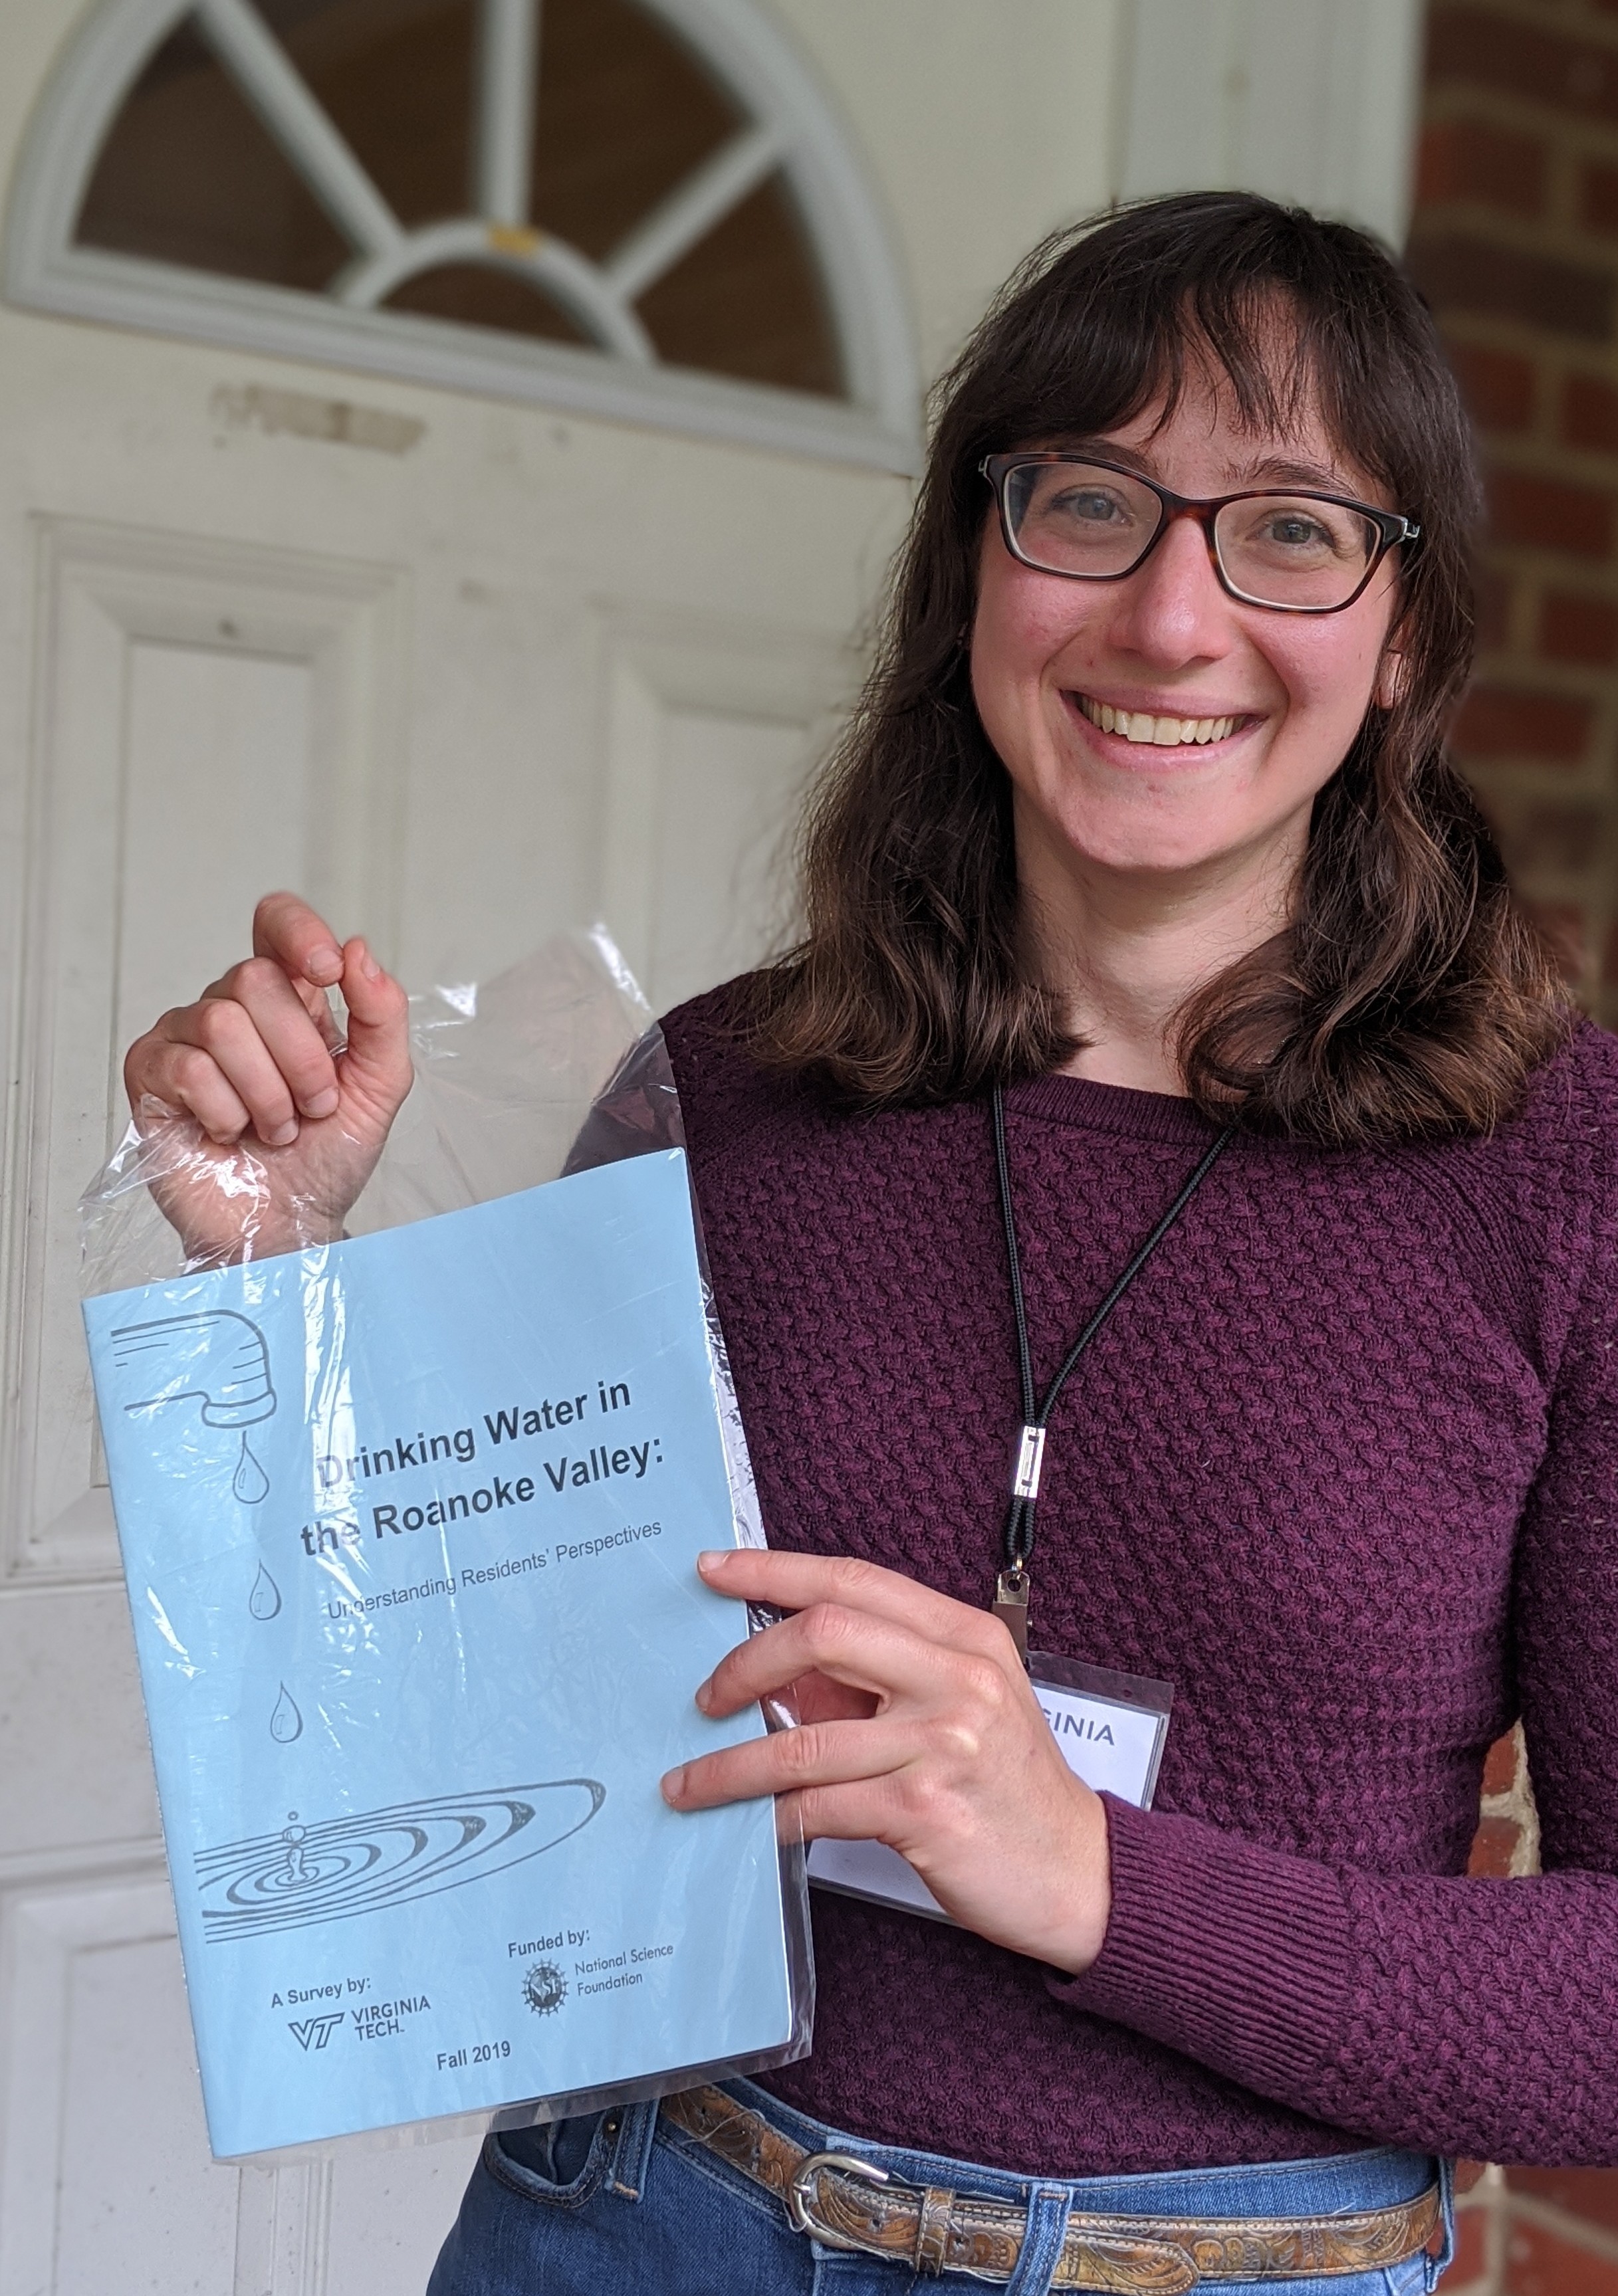 This photo shows a young Caucasian woman with shoulder-length brown hair, glasses, and a big smile. She is standing at the front door of a brick home holding a plastic bag with a blue book inside it titled "Drinking Water in the Roanoke Valley."